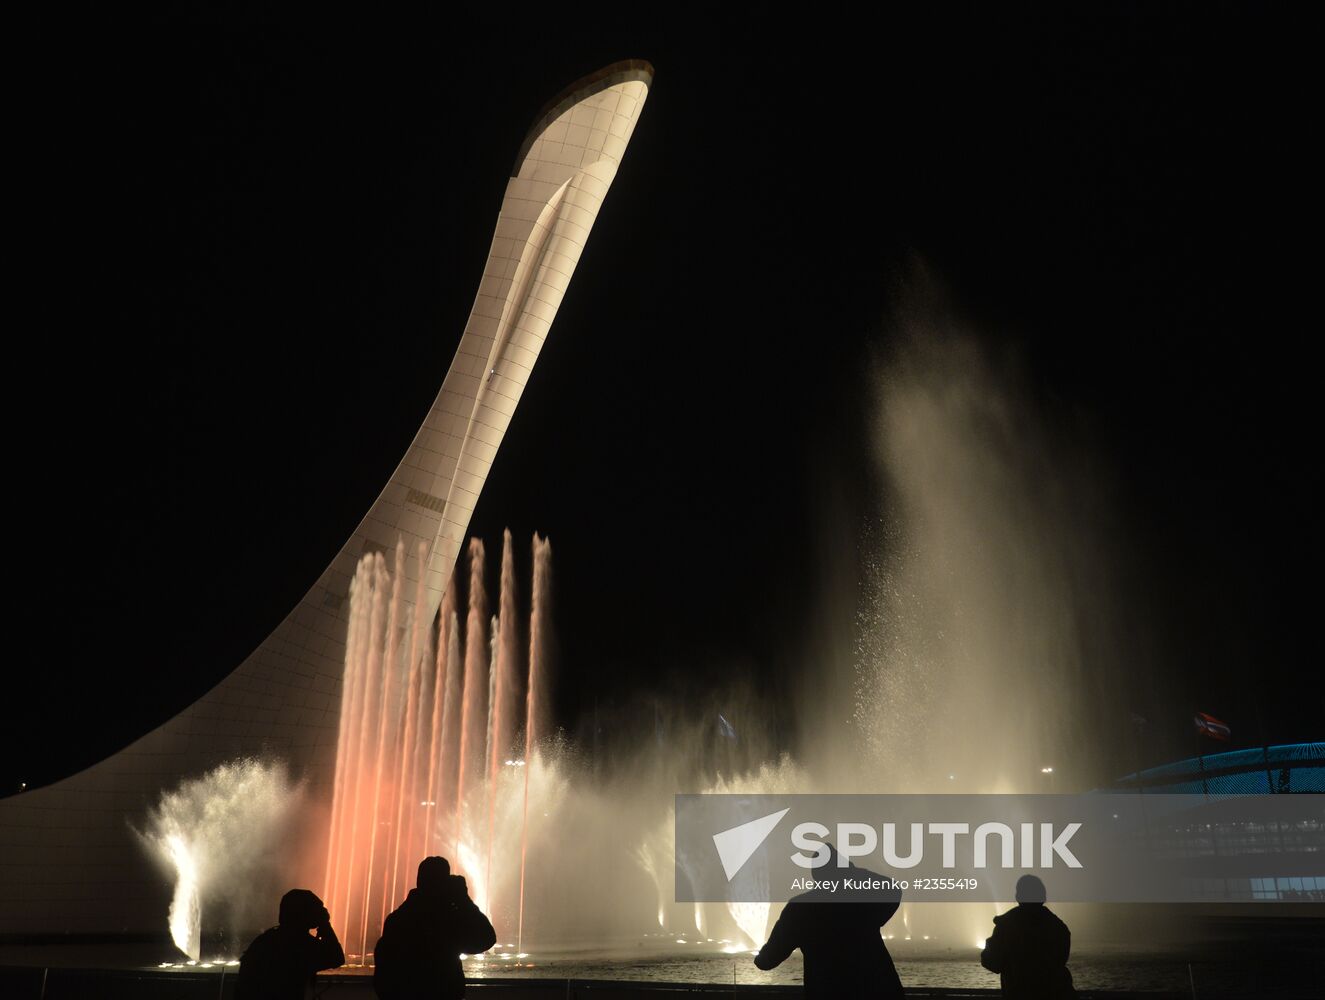 Rehearsal of opening of 22 Winter Olympic Games at Sochi Olympic Park